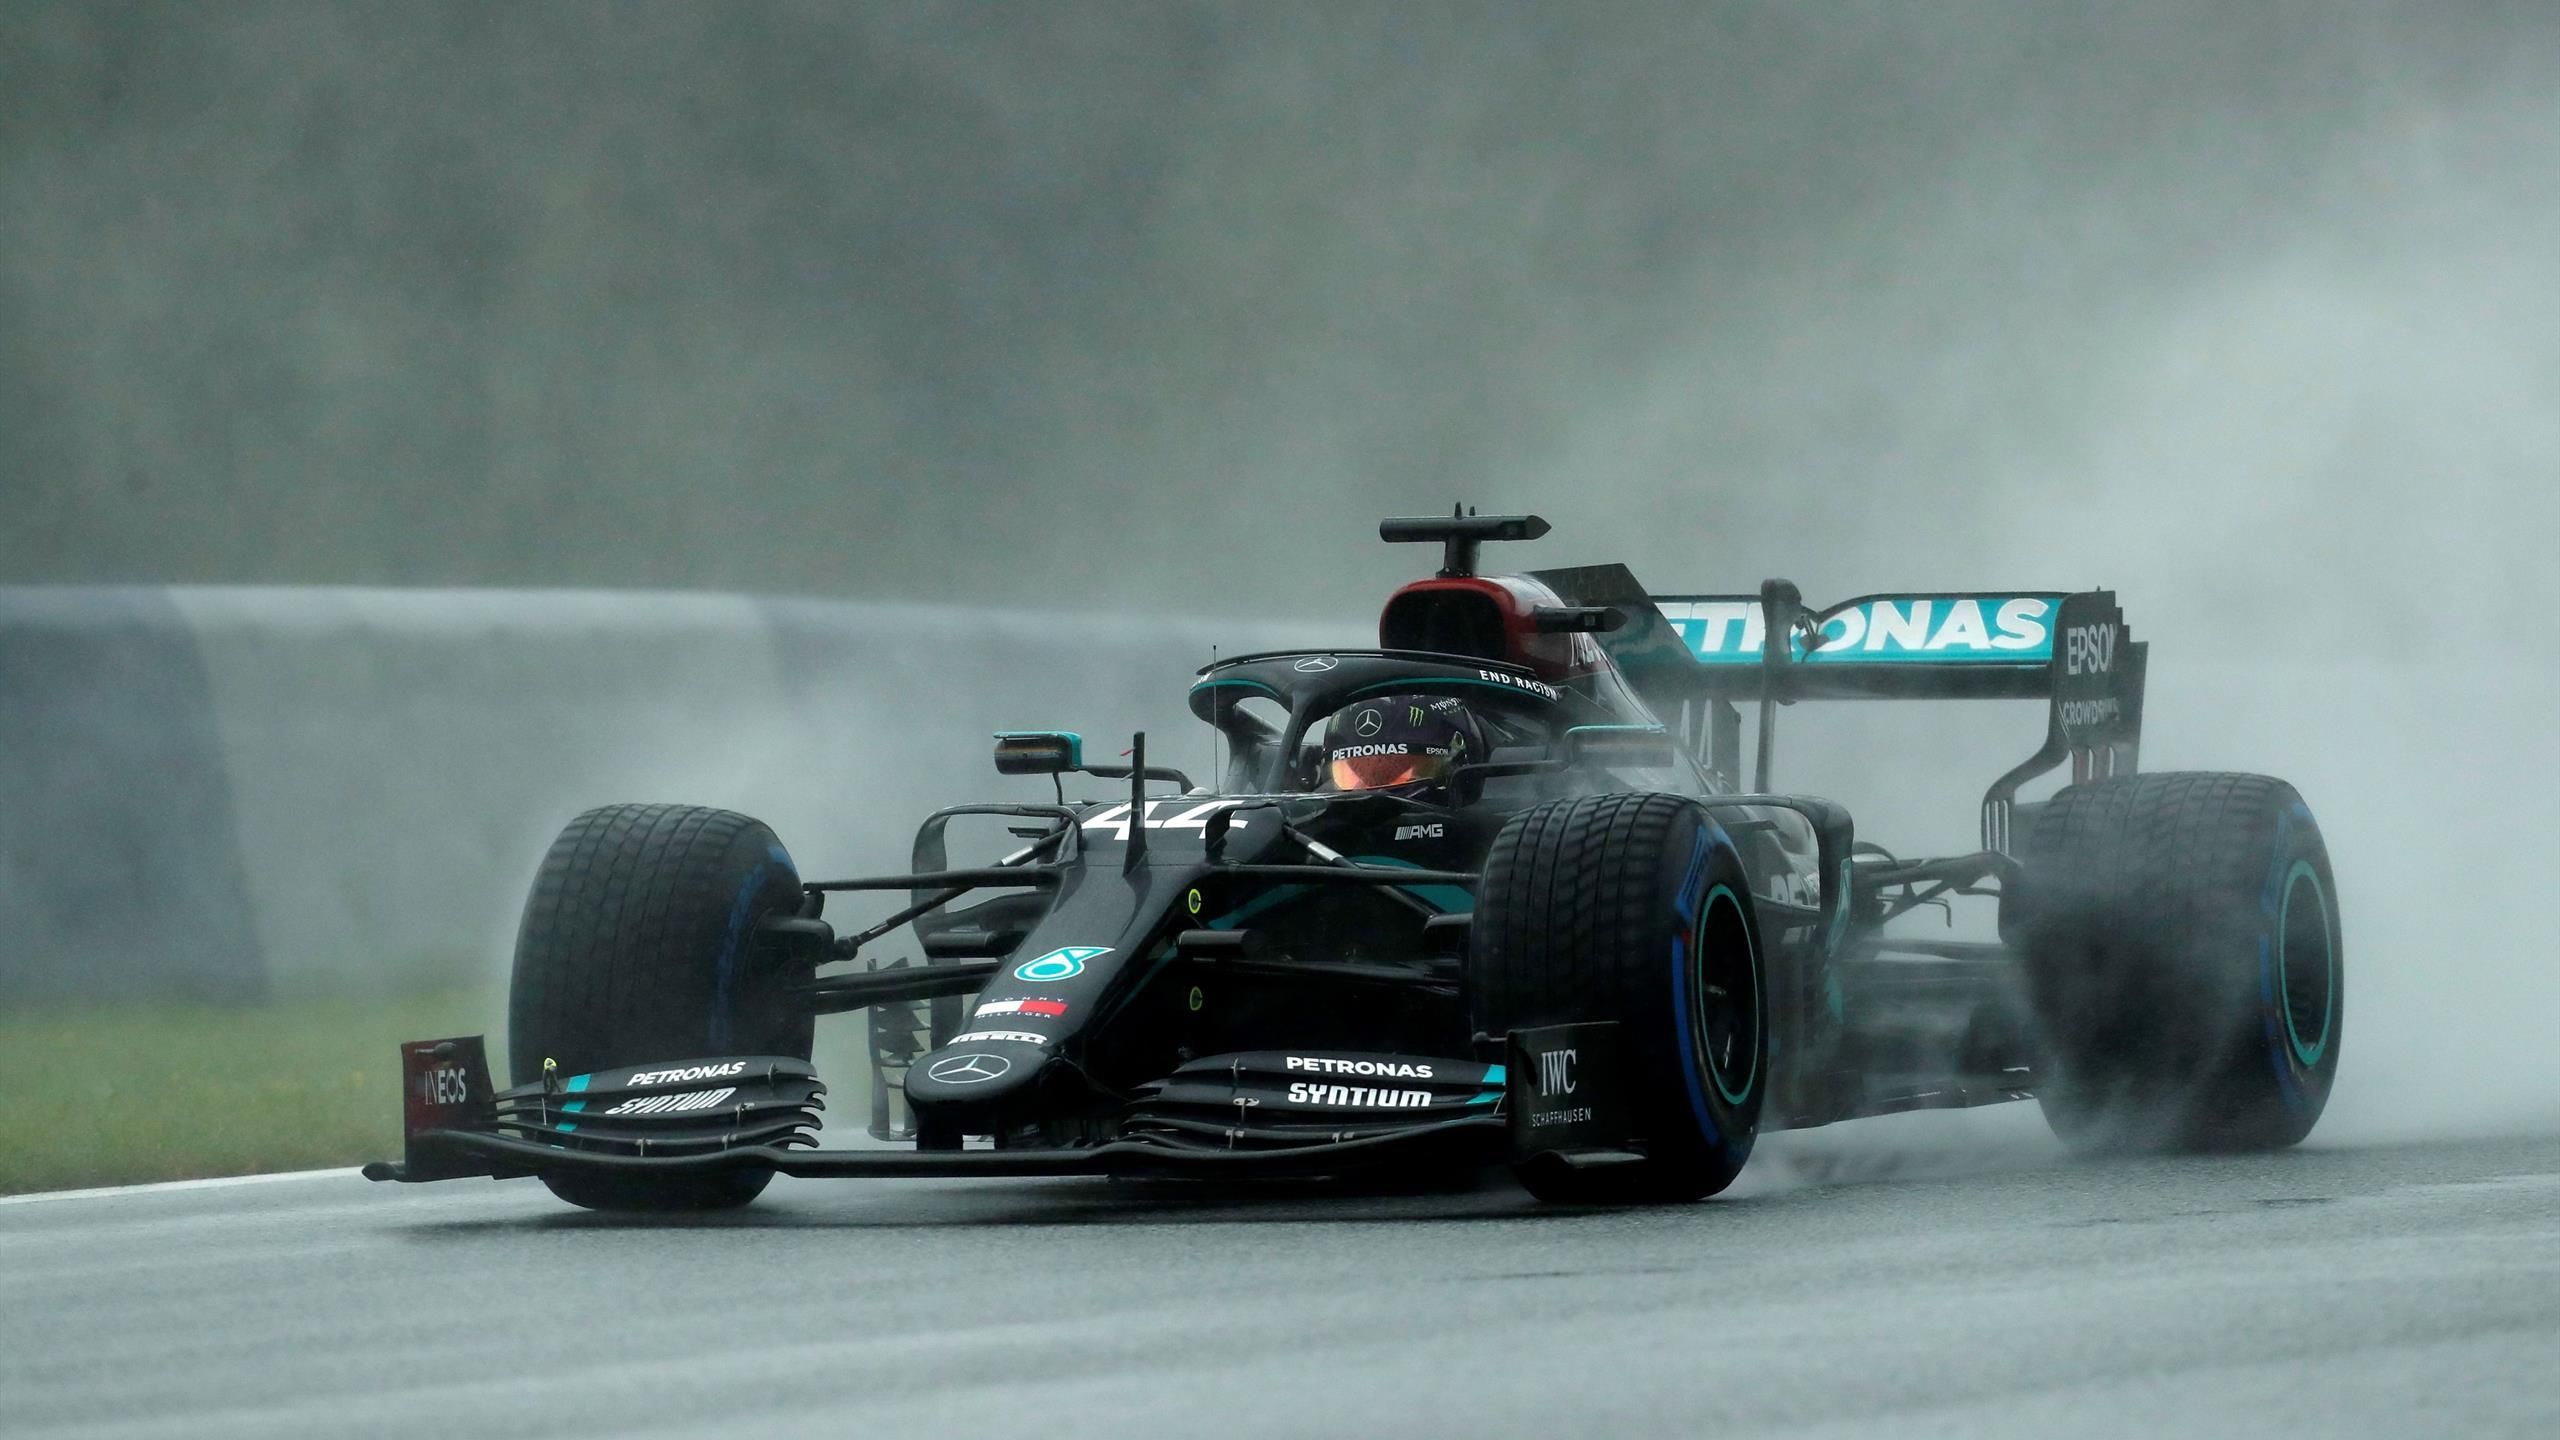 Lewis Hamilton F1 Championship 2020 Wallpapers Wallpaper Cave from wallpape...